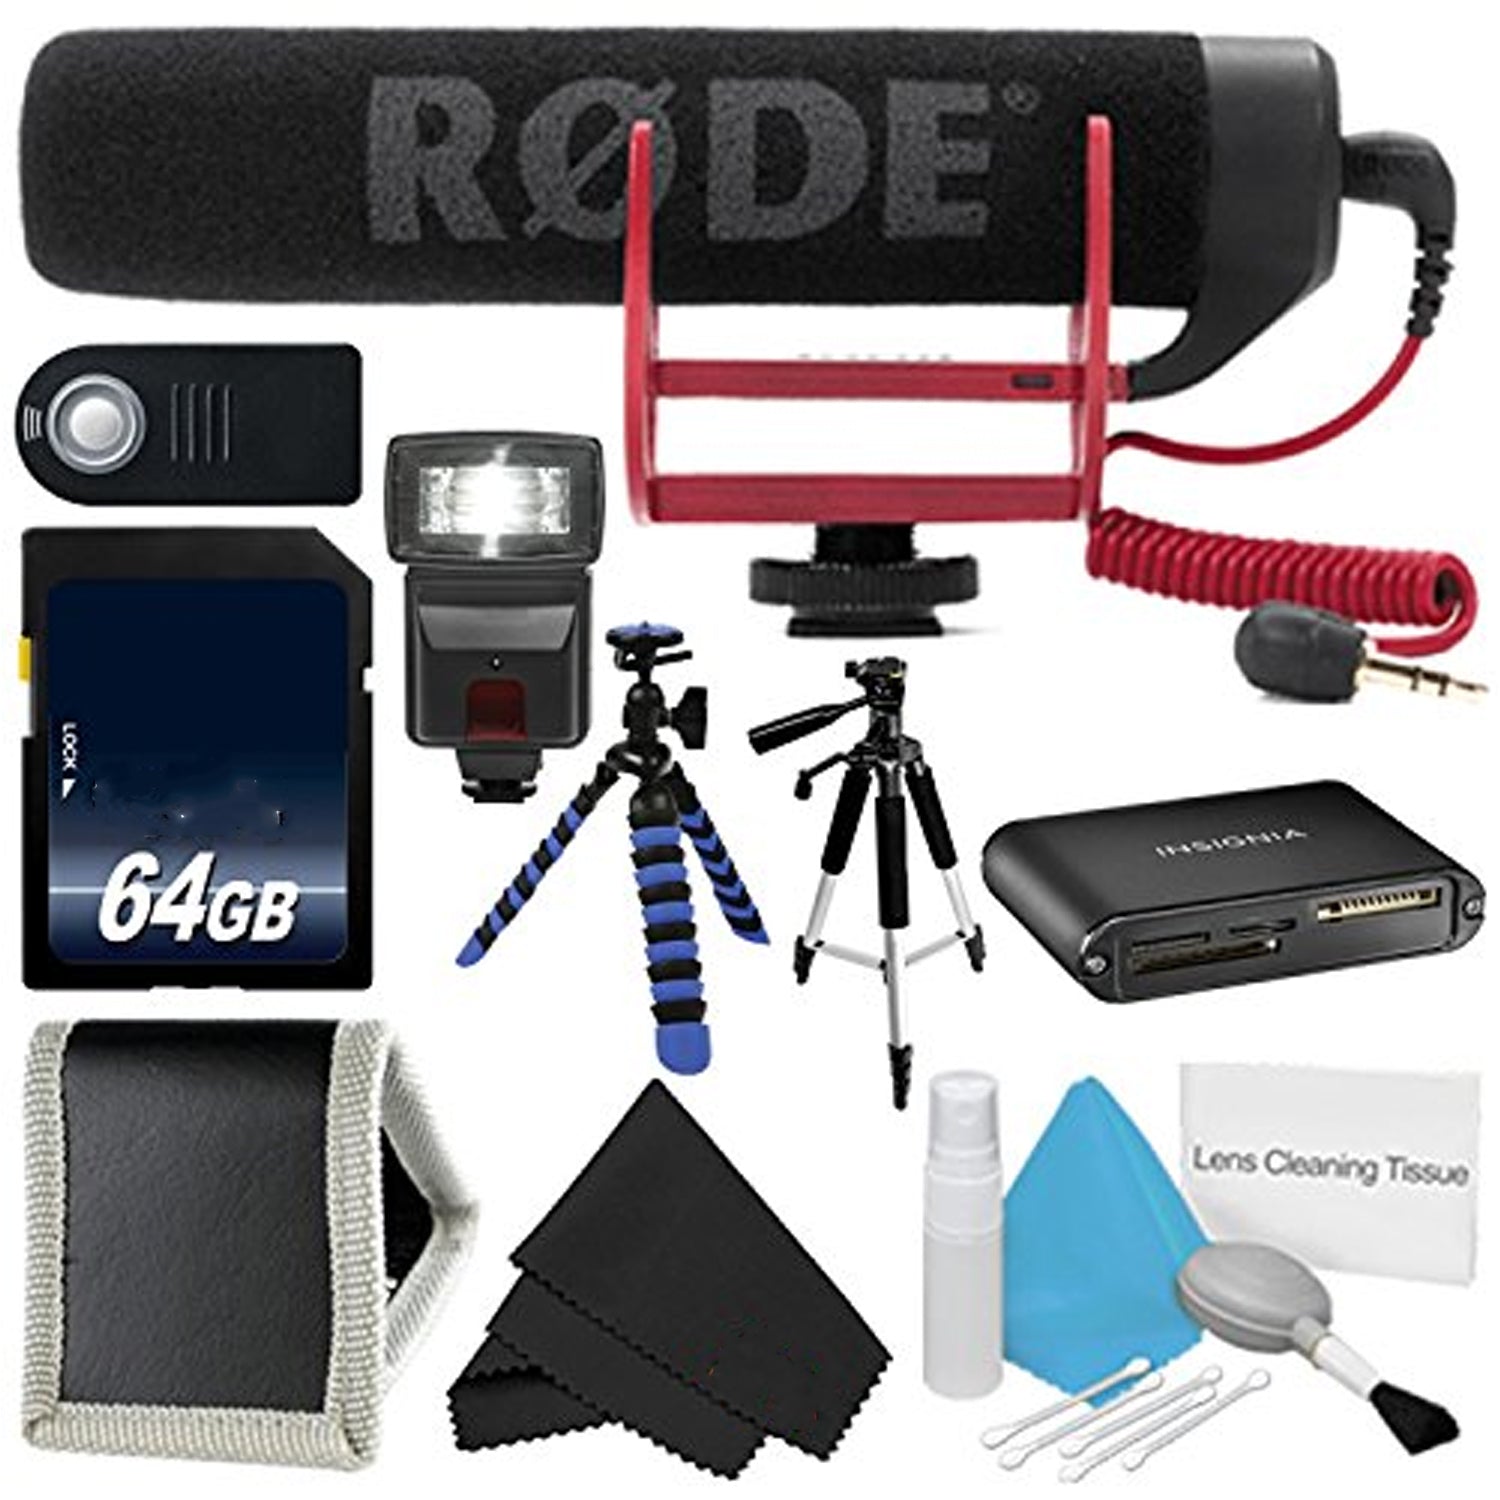 Rode VideoMic GO VIDEOMIC-GO + 64GB Memory Card + Flexible Tripod with Gripping Rubber Legs + Full Size Tripod + Deluxe Cleaning Kit - Bundle